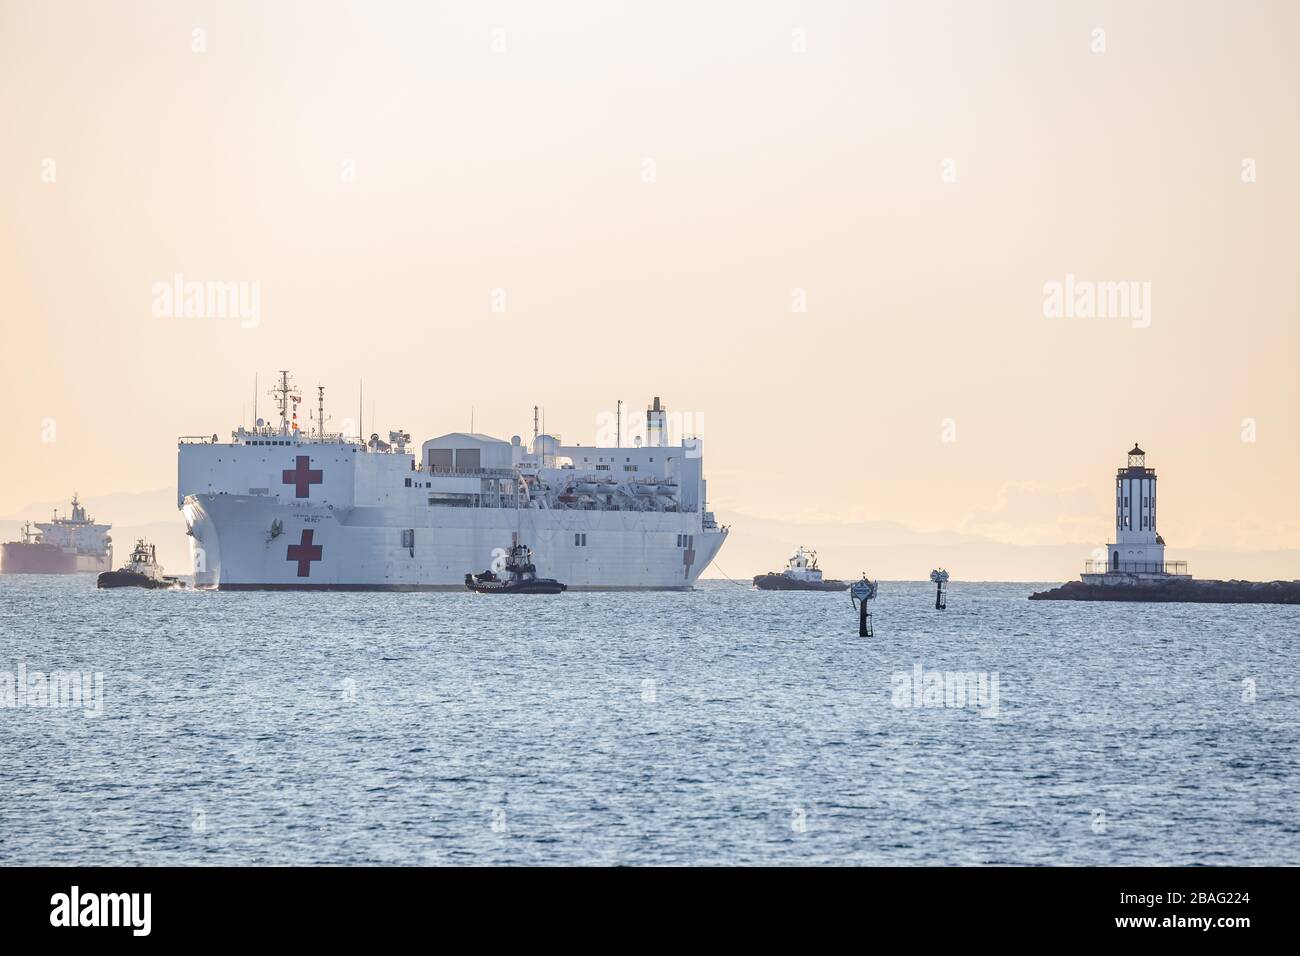 USNS Mercy navy hospital ship arrives at Port of Los Angeles in San Pedro, CA March 27, 2020 during Covid-19 crisis Stock Photo